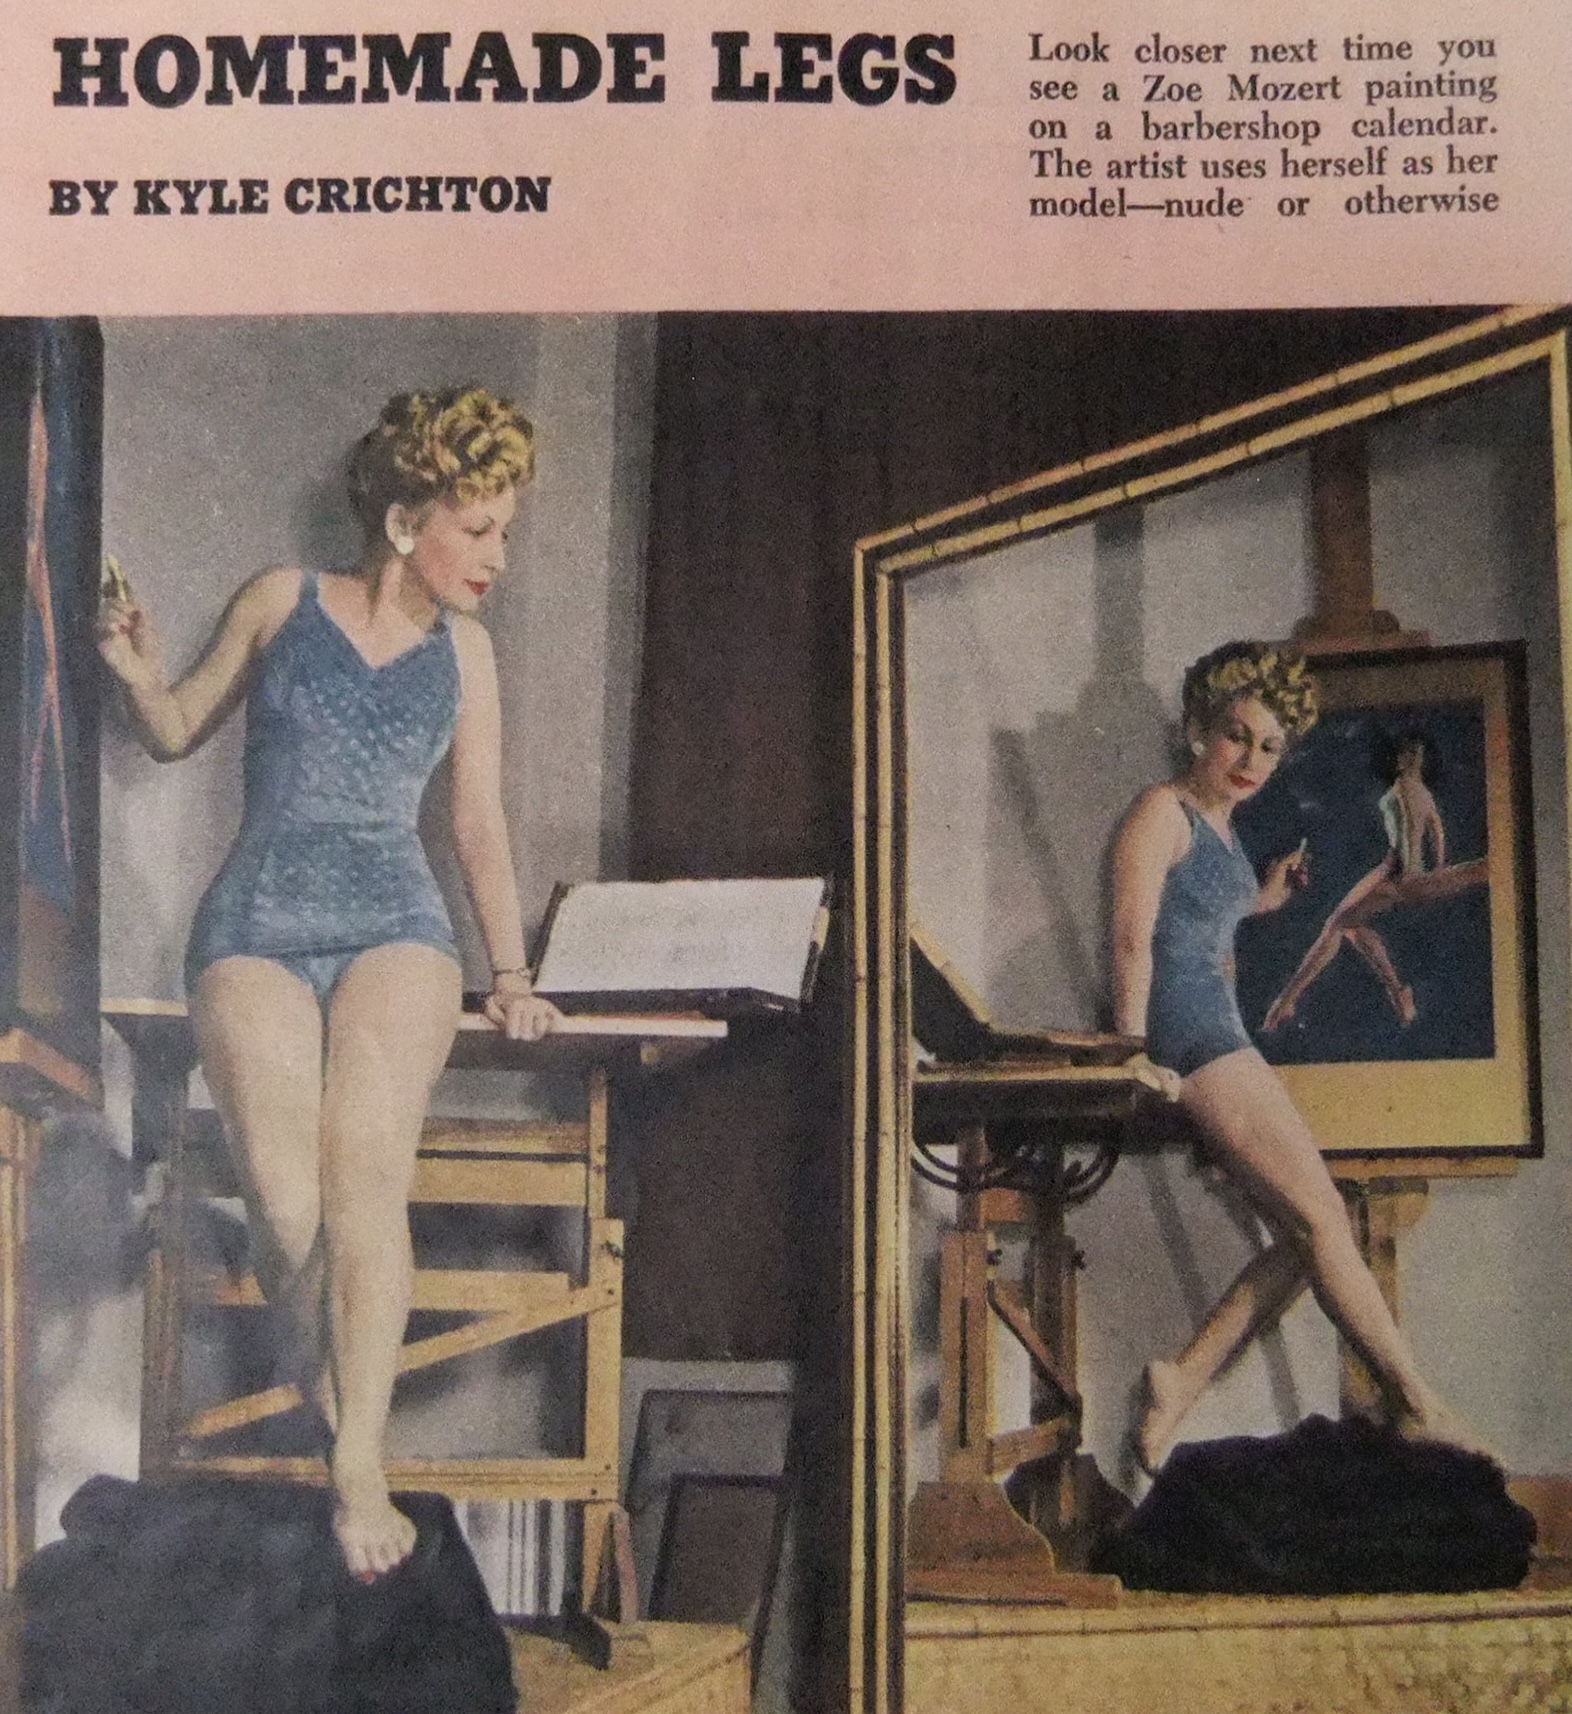 Graphic display with a woman in a blue swimsuit looking in a mirror and working on an easel. The text reads "Homemade legs / By Kyle Chrichton / Look closer next time you see a Zoe Mozert painting on a barbershop calendar. The artist uses herself as her model—nude or otherwise."